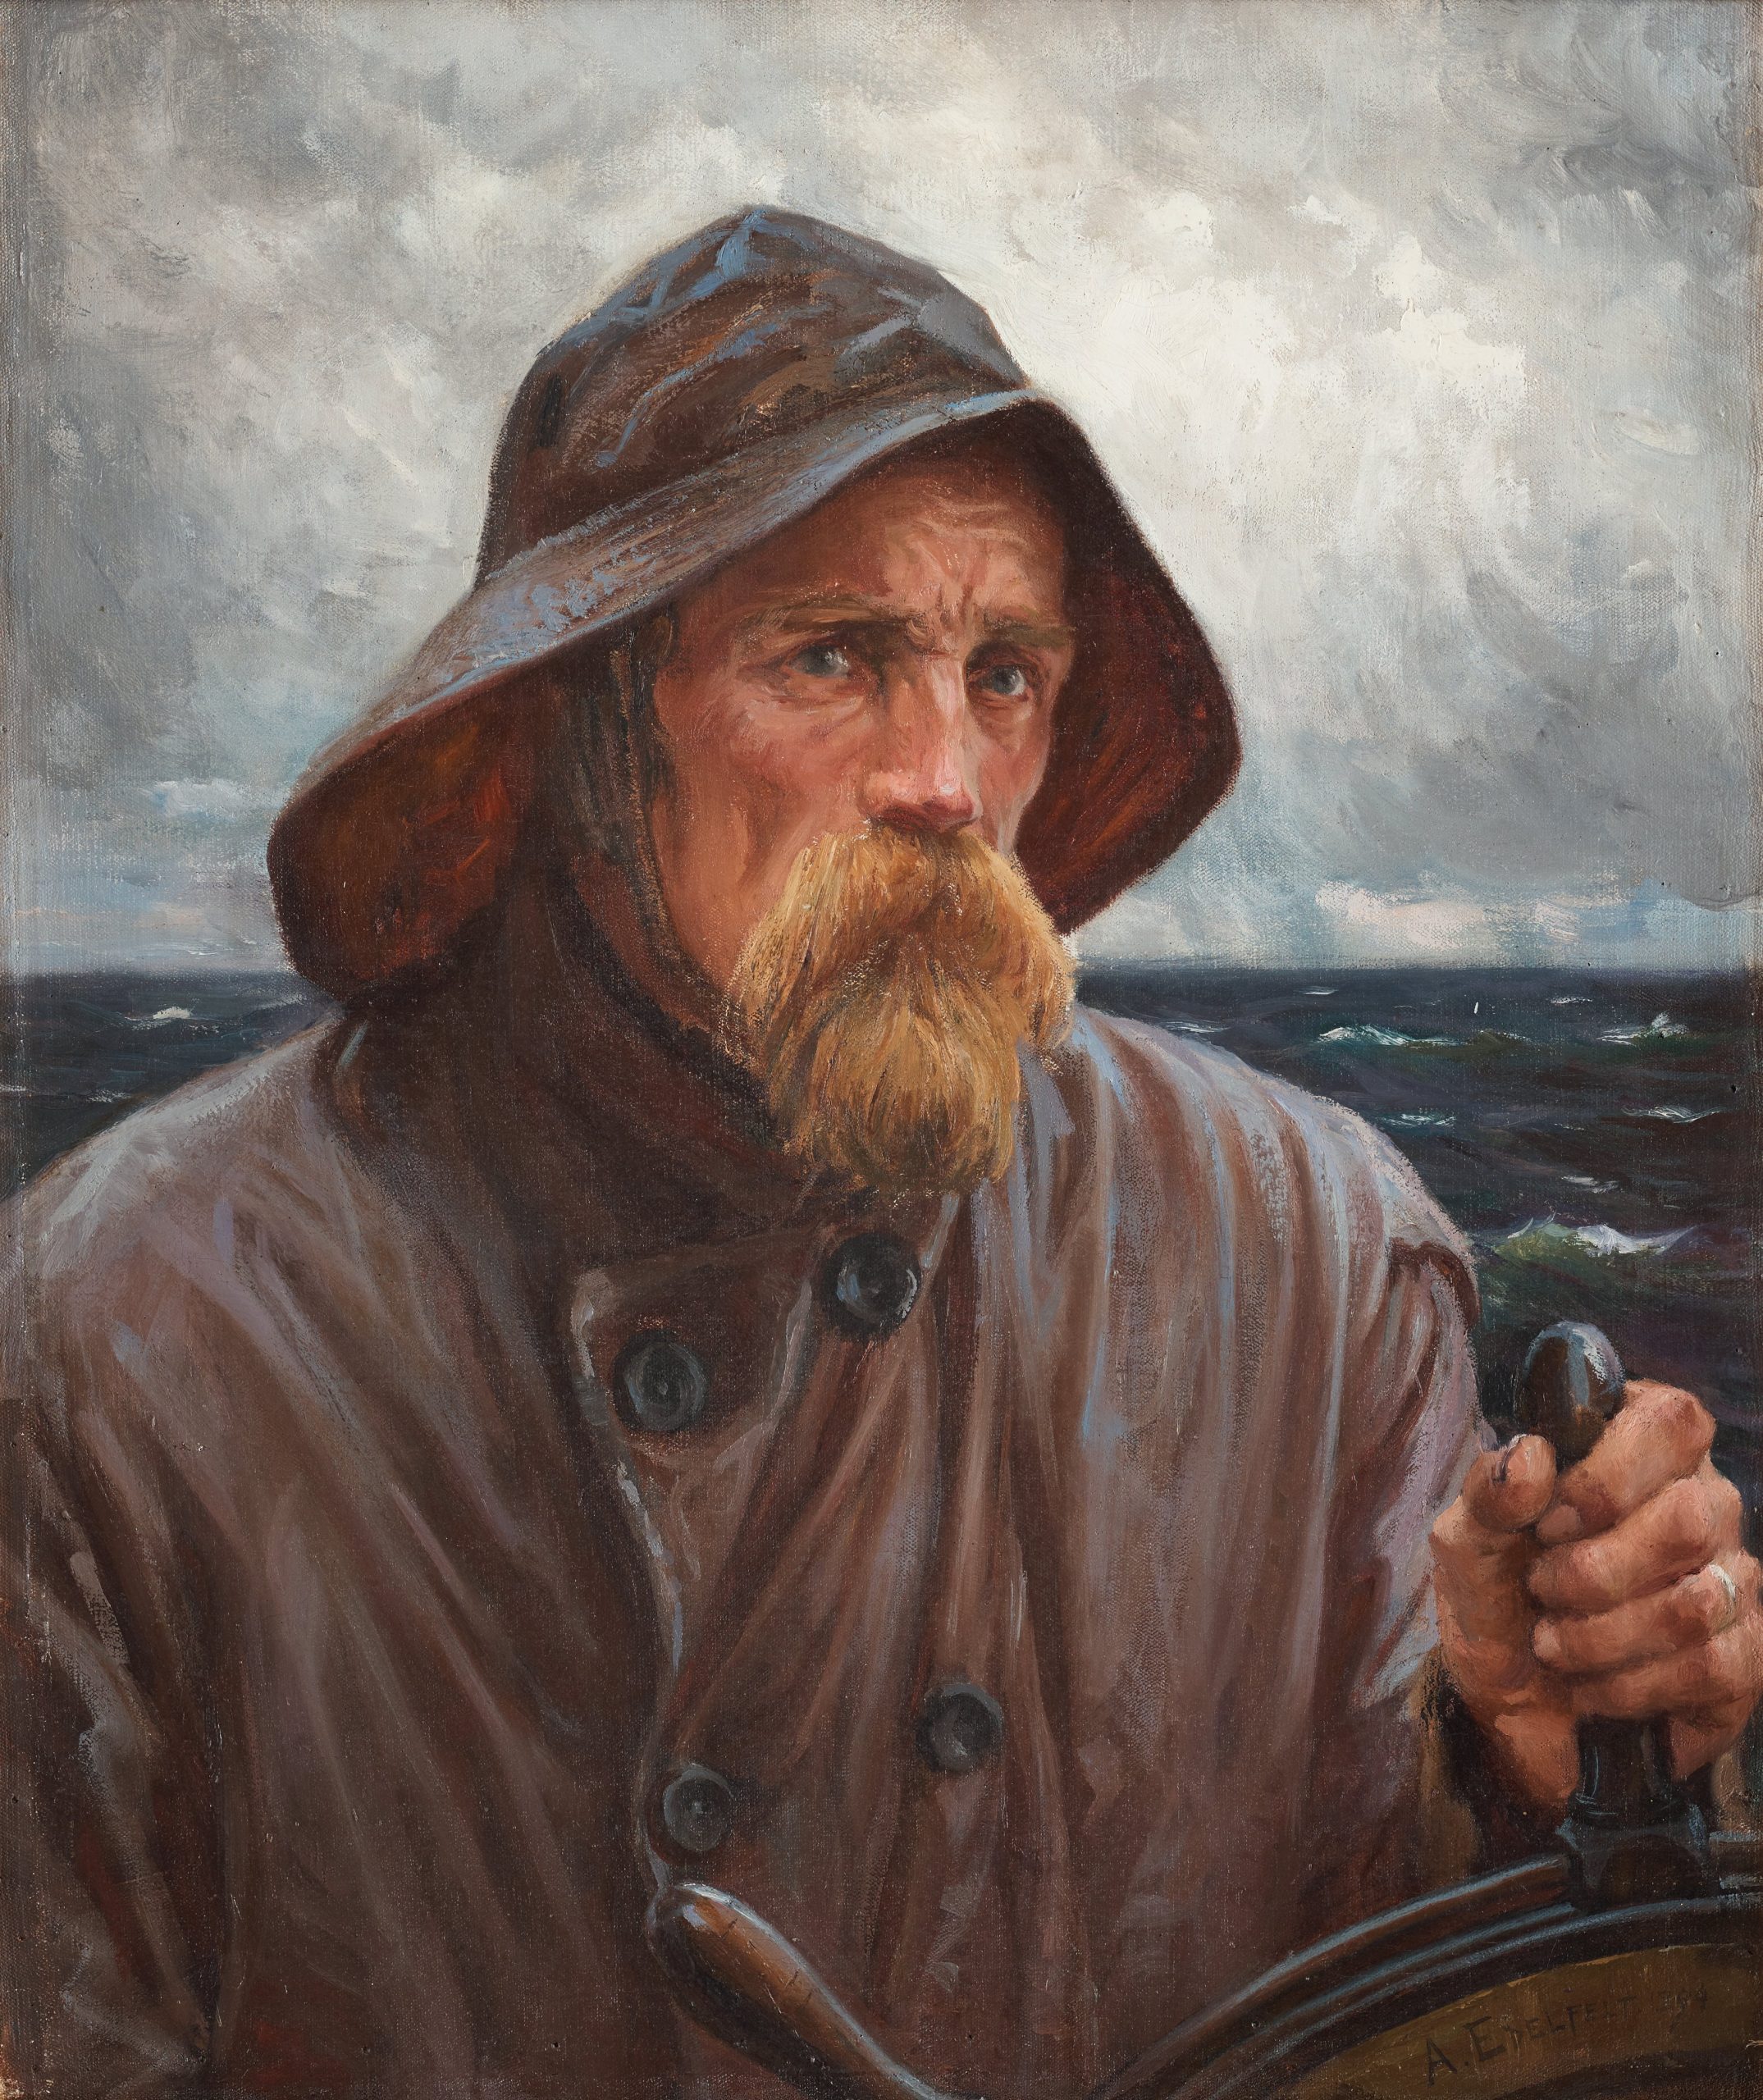 A closeup of a bearded man steering the helm of a ship on a cloudy day